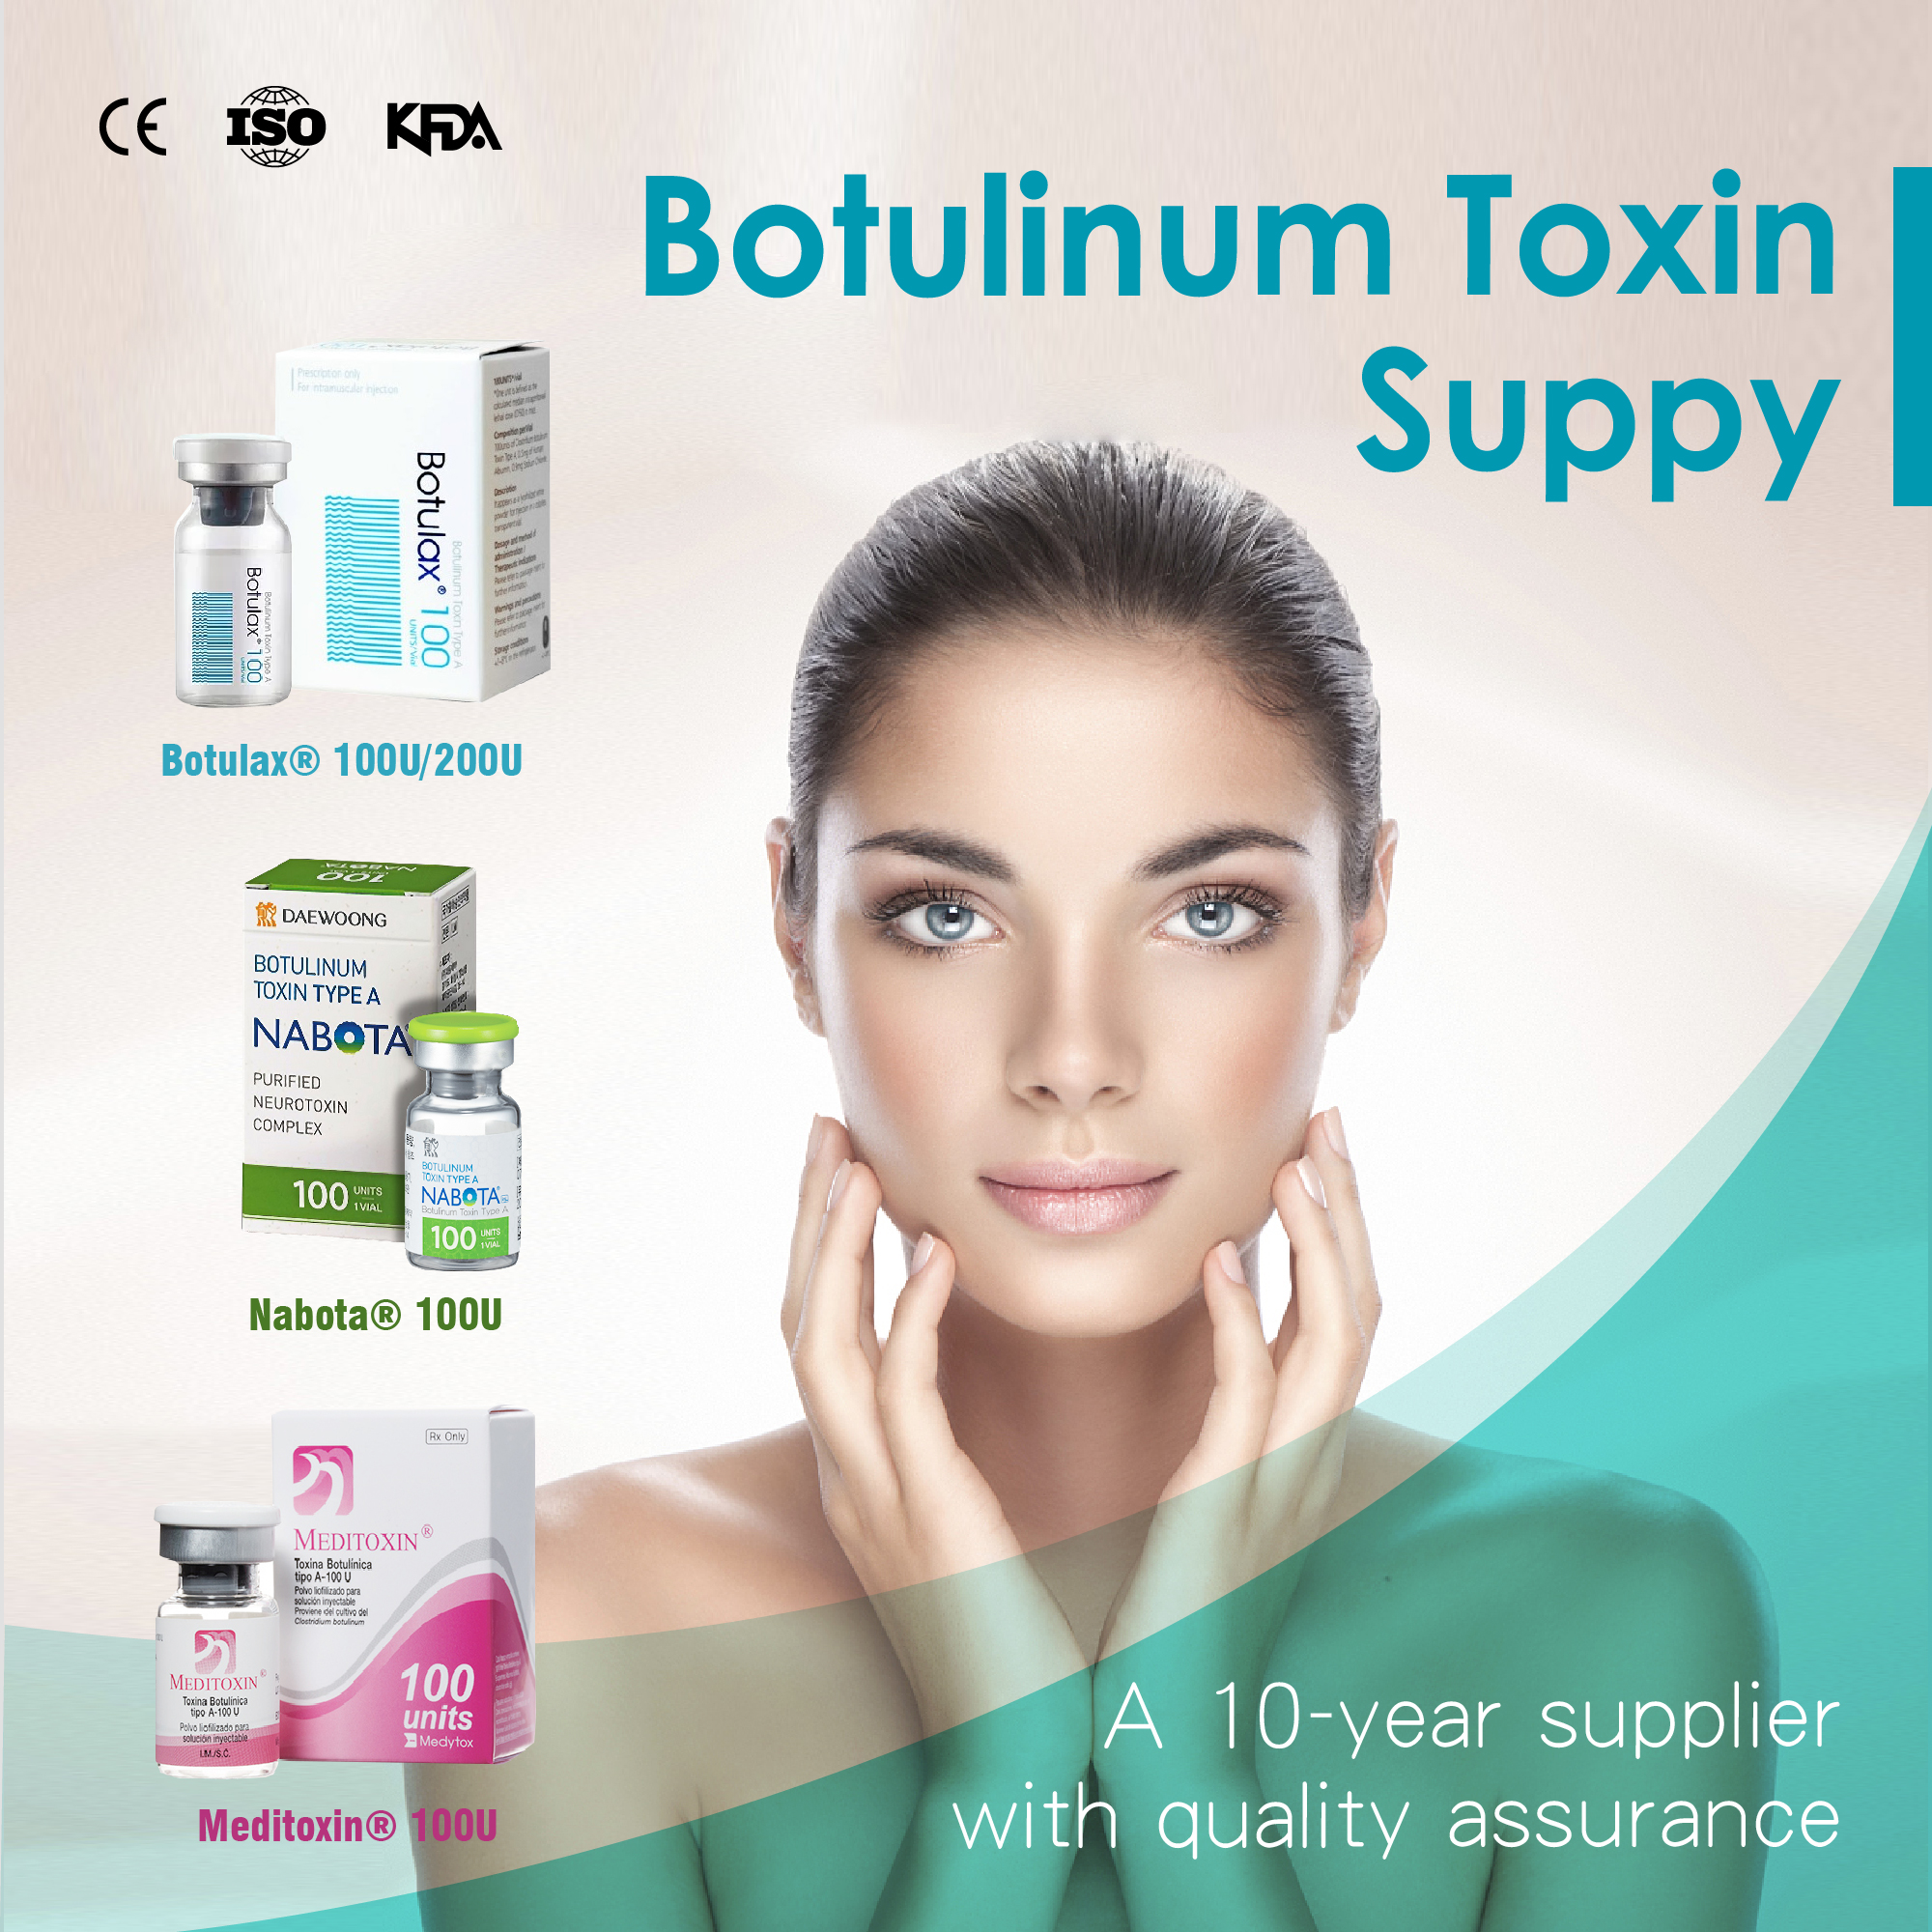 Why Is Botulinum Toxin Used For Cosmetic Procedures?